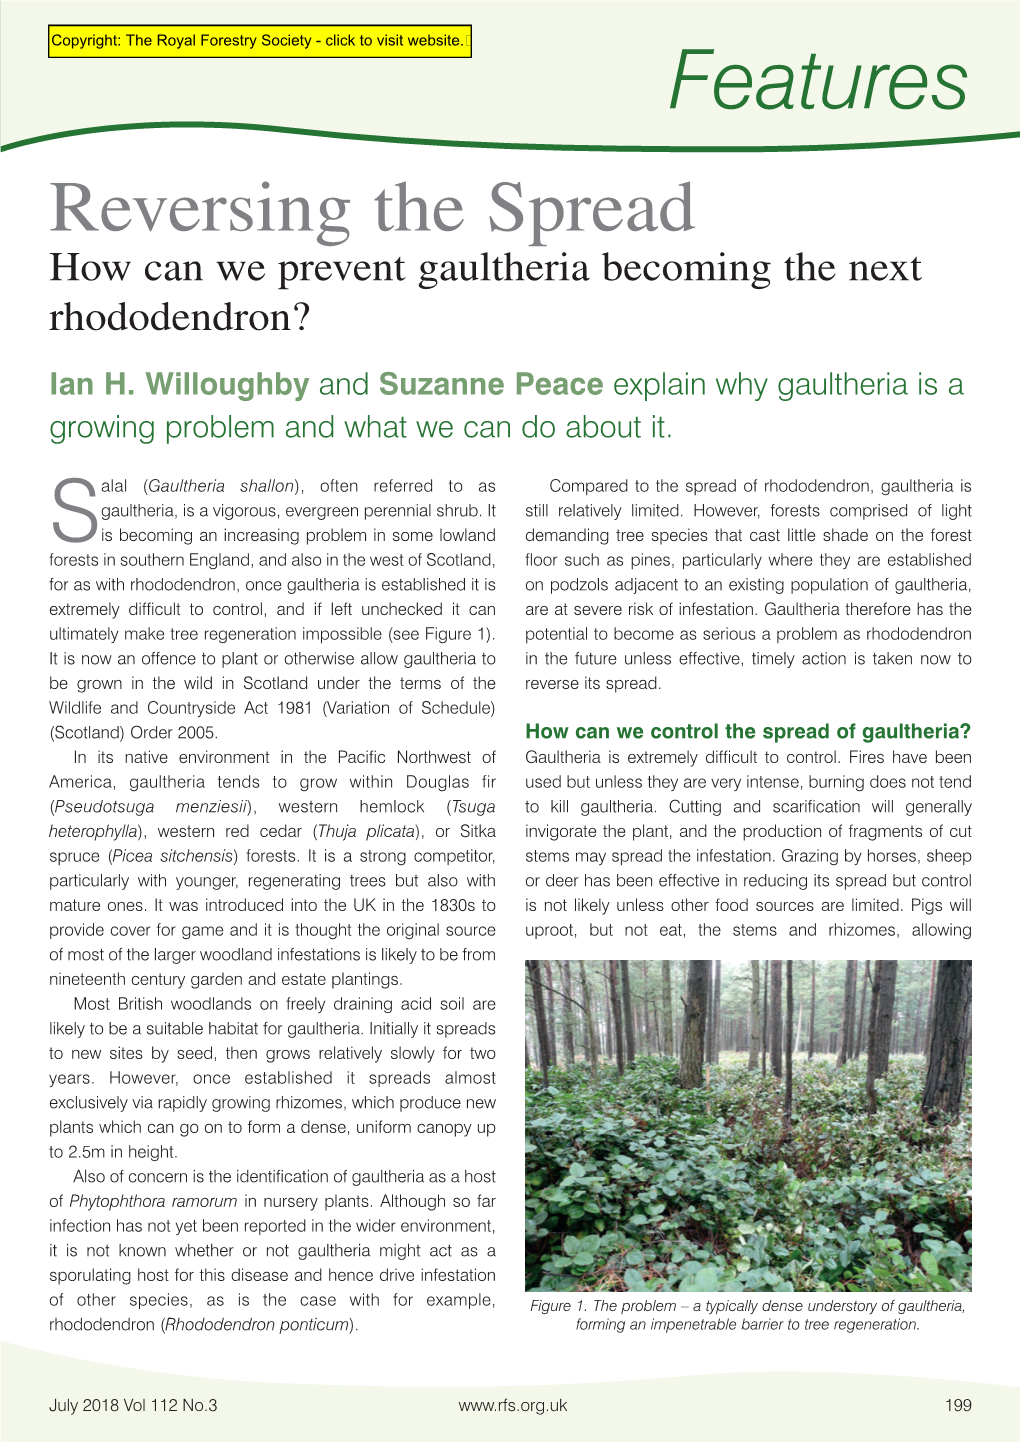 Features Reversing the Spread How Can We Prevent Gaultheria Becoming the Next Rhododendron?